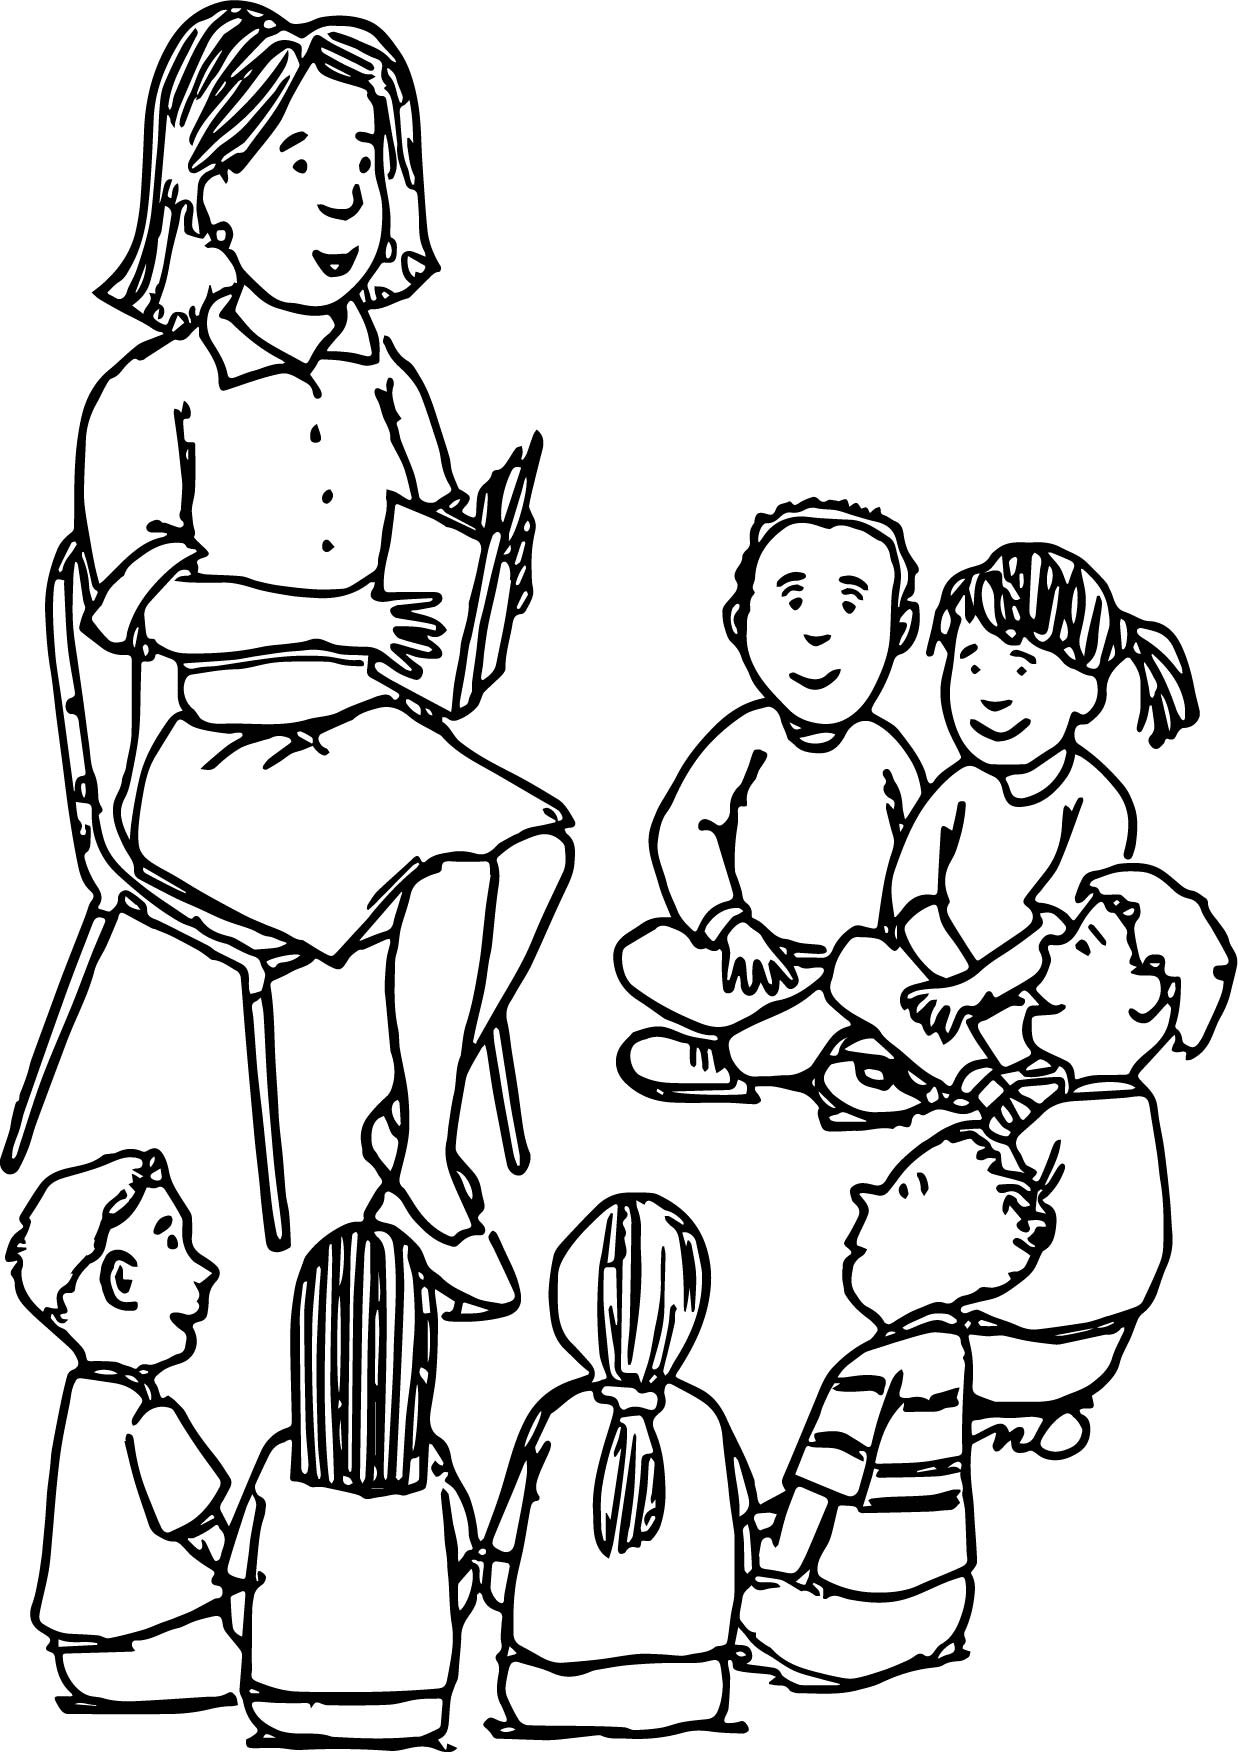 Coloring Kids
 Teacher Coloring Pages Best Coloring Pages For Kids